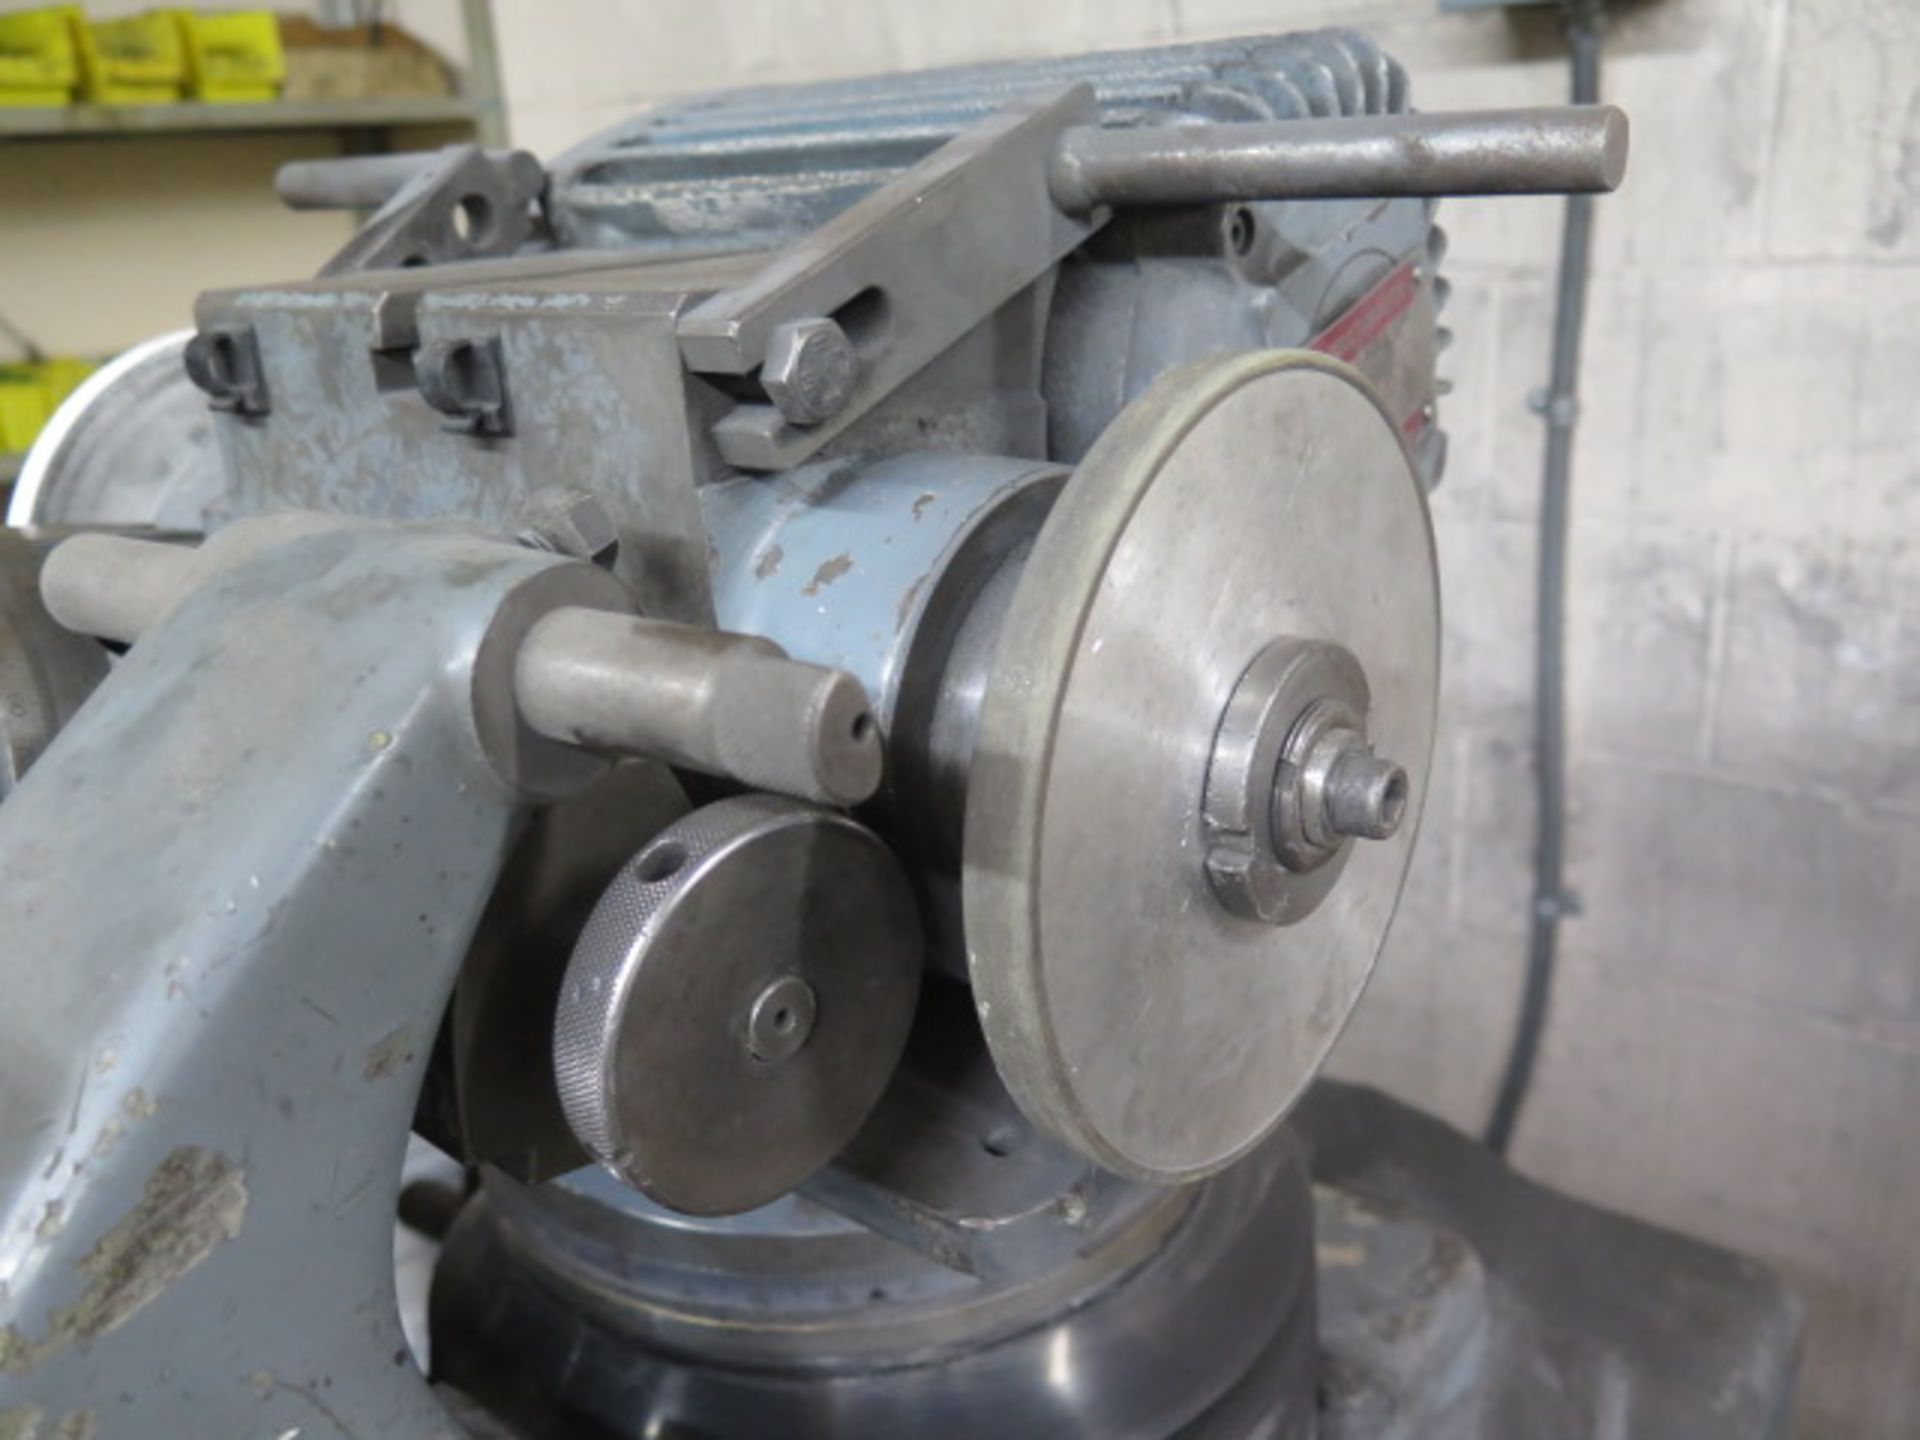 LeBlond Makino C-40 Universal Tool &Cutter Grinder s/n 81-0027 w/ Compound Grinding Head, SOLD AS IS - Image 4 of 12